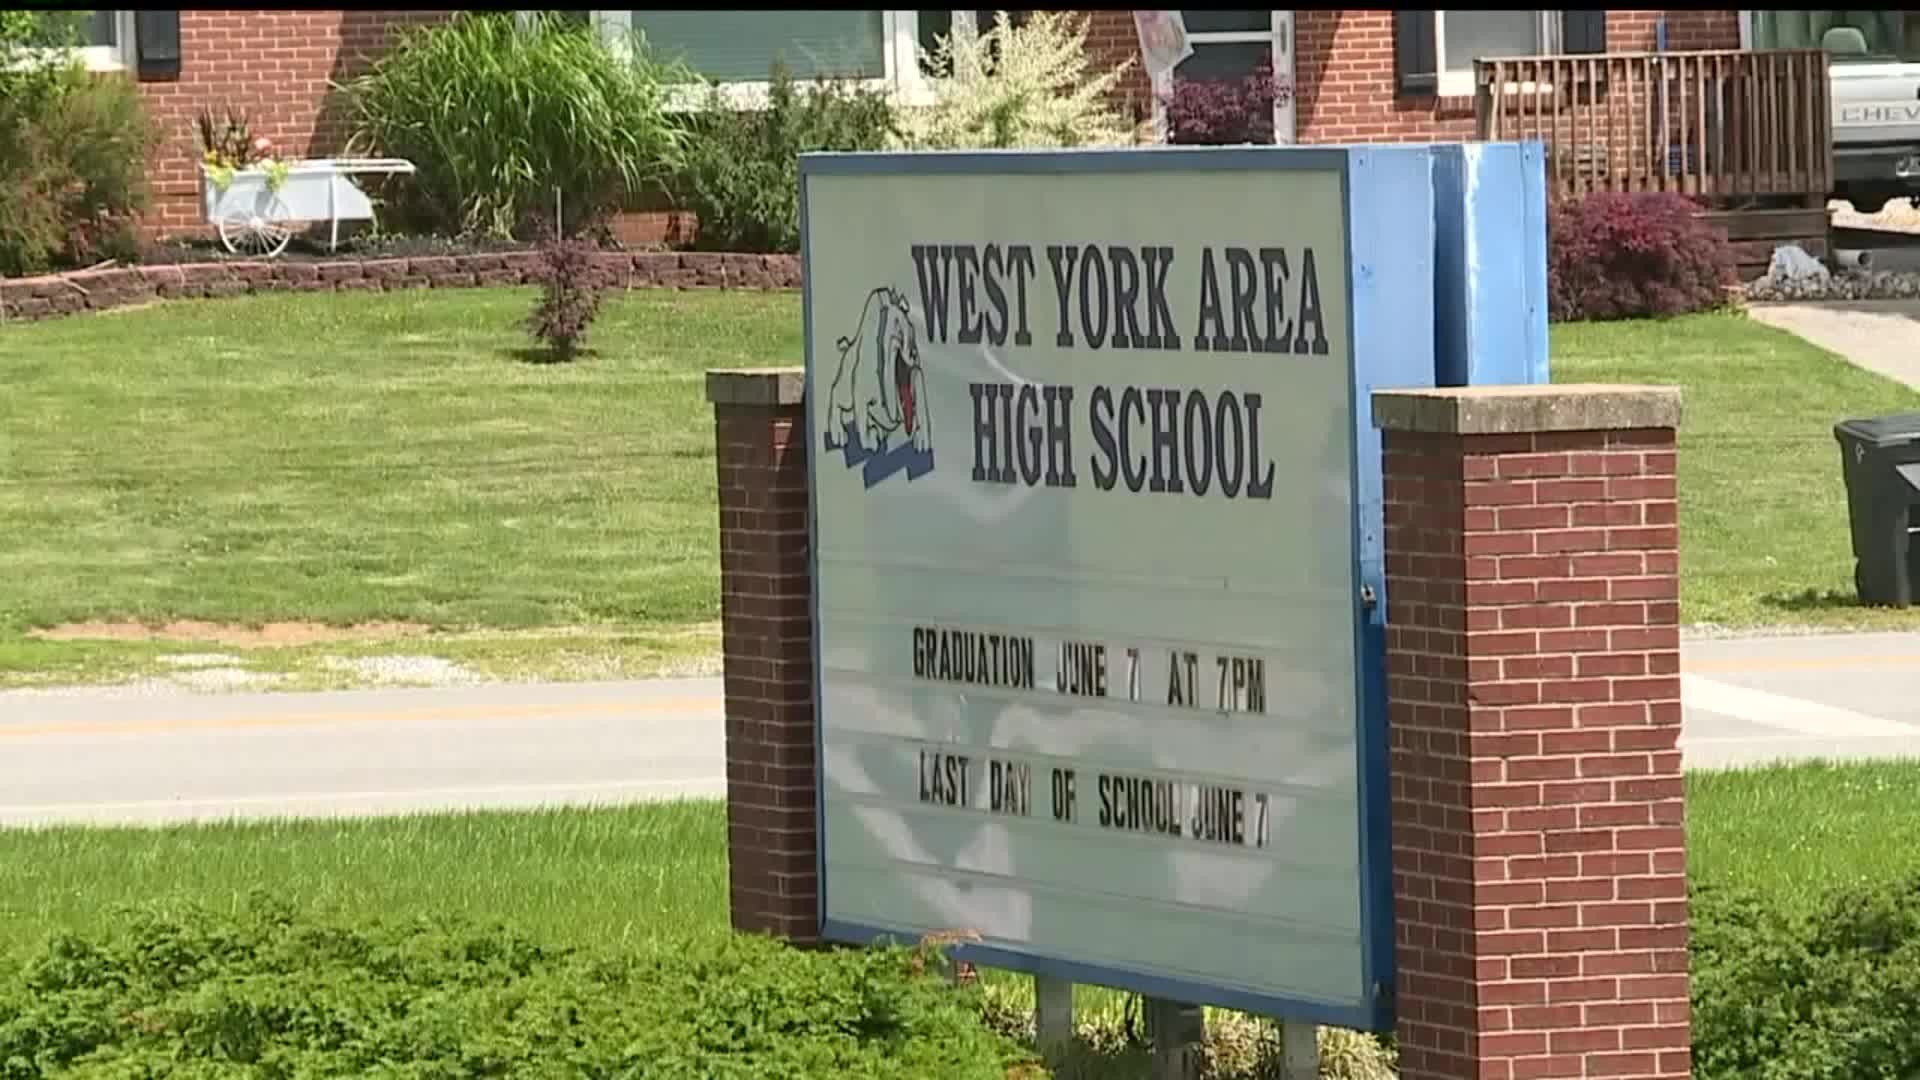 Controversy over new program at West York high school